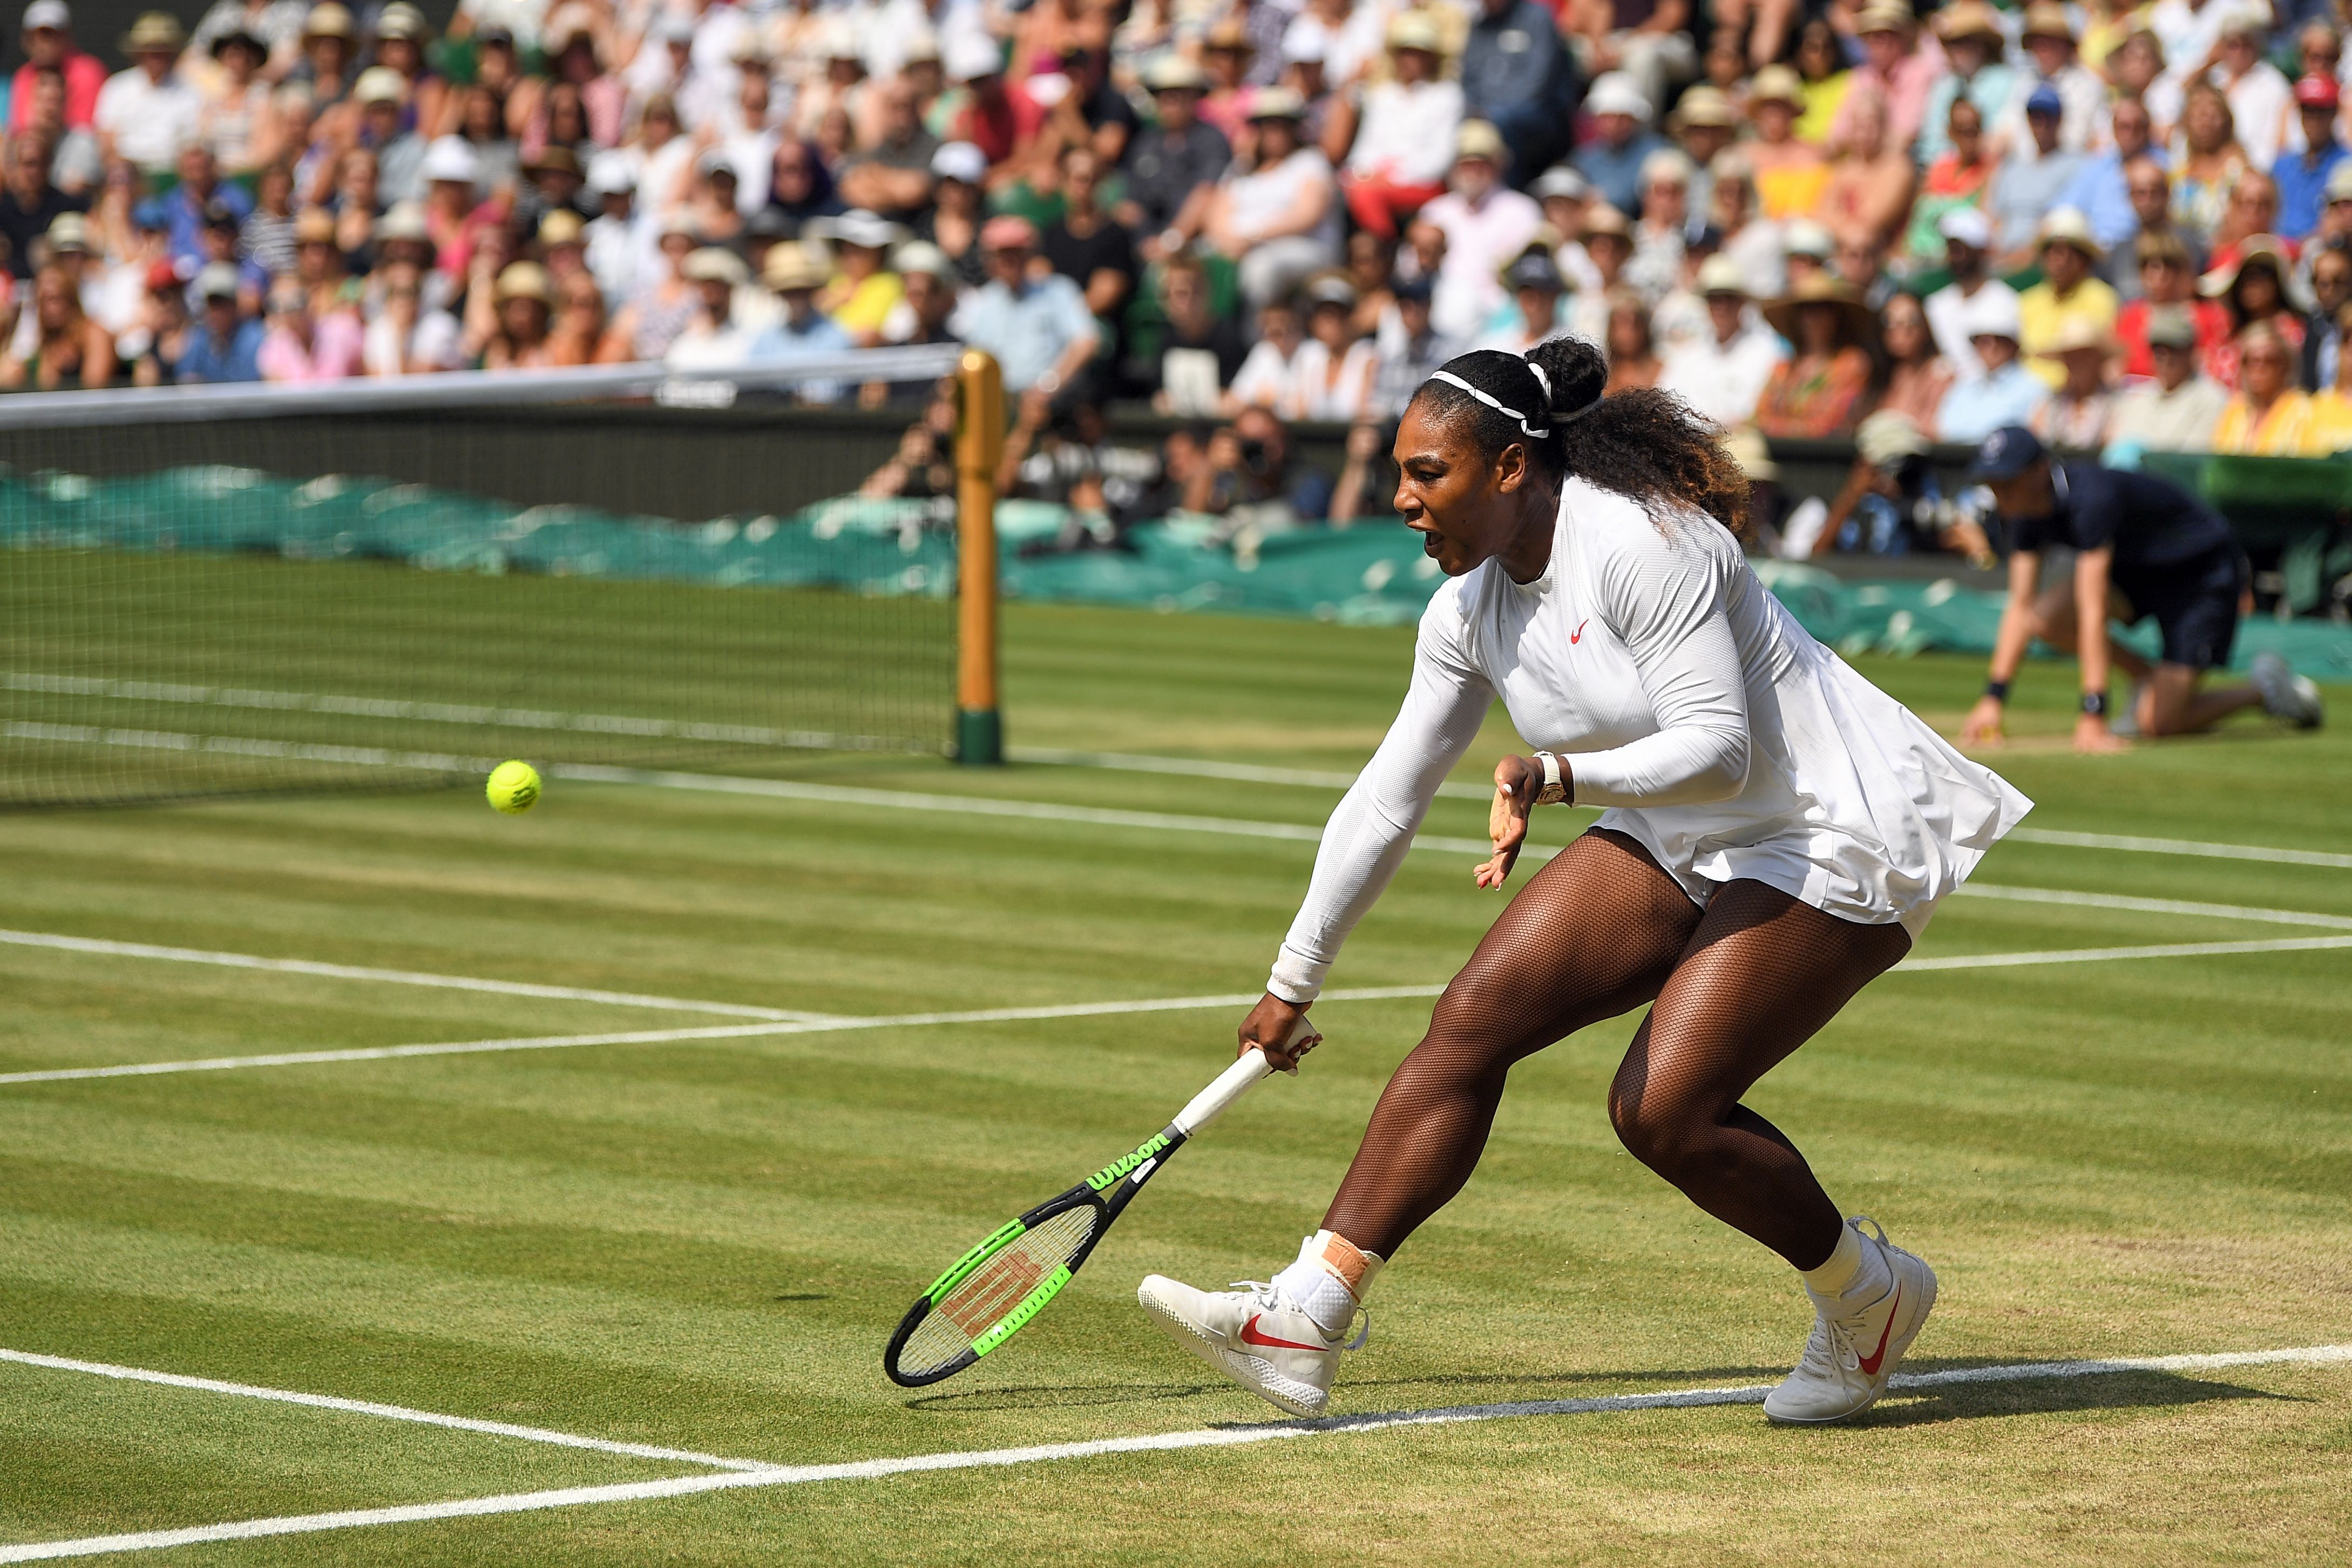 How to Watch Serena Williams in the 2018 Wimbledon Women's Singles Final for Free Online